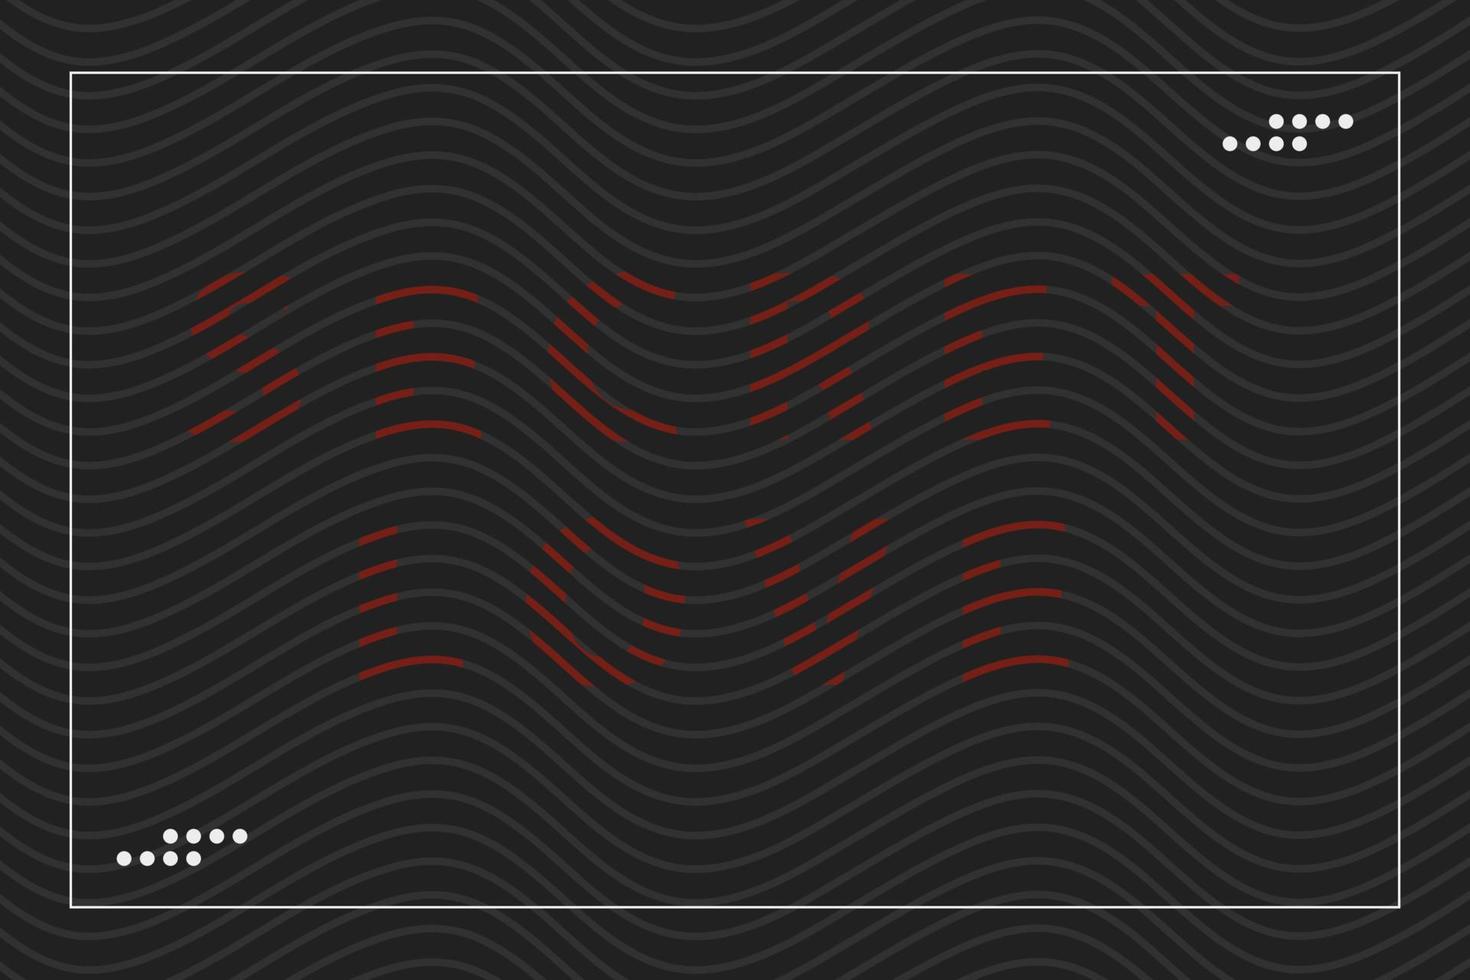 Abstract Wavy Lines Design Background With Secret Text vector